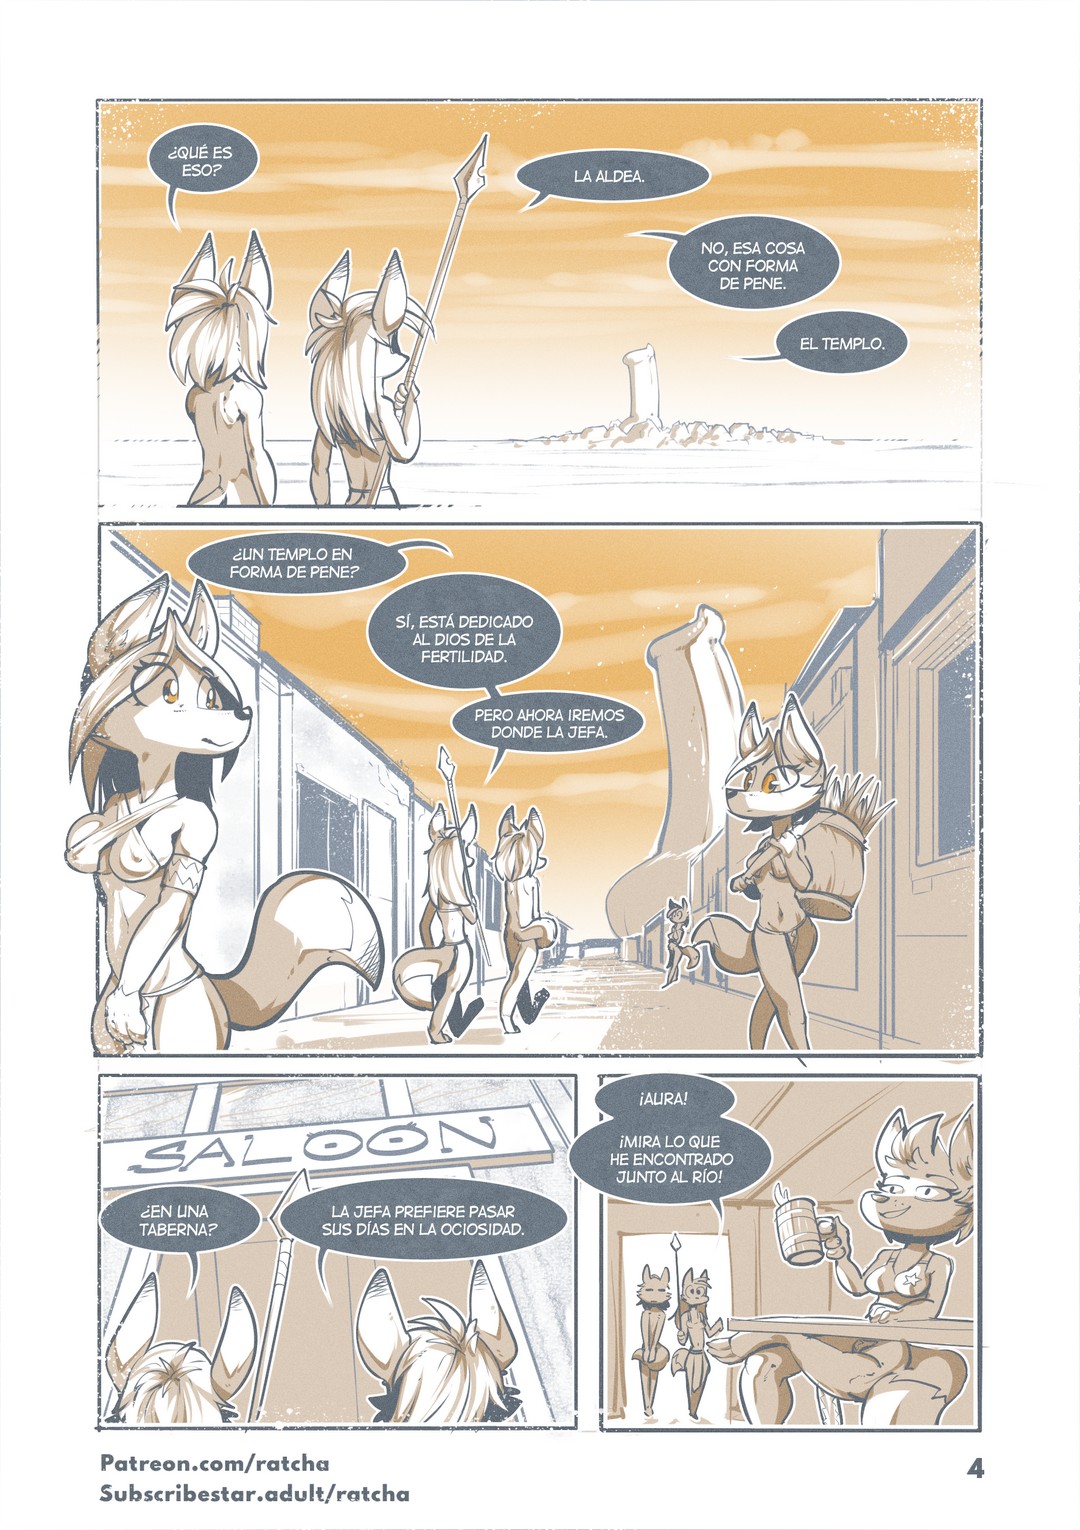 Reincarnated In Another World As A Furry Fox Ratcha Comic Porno 04